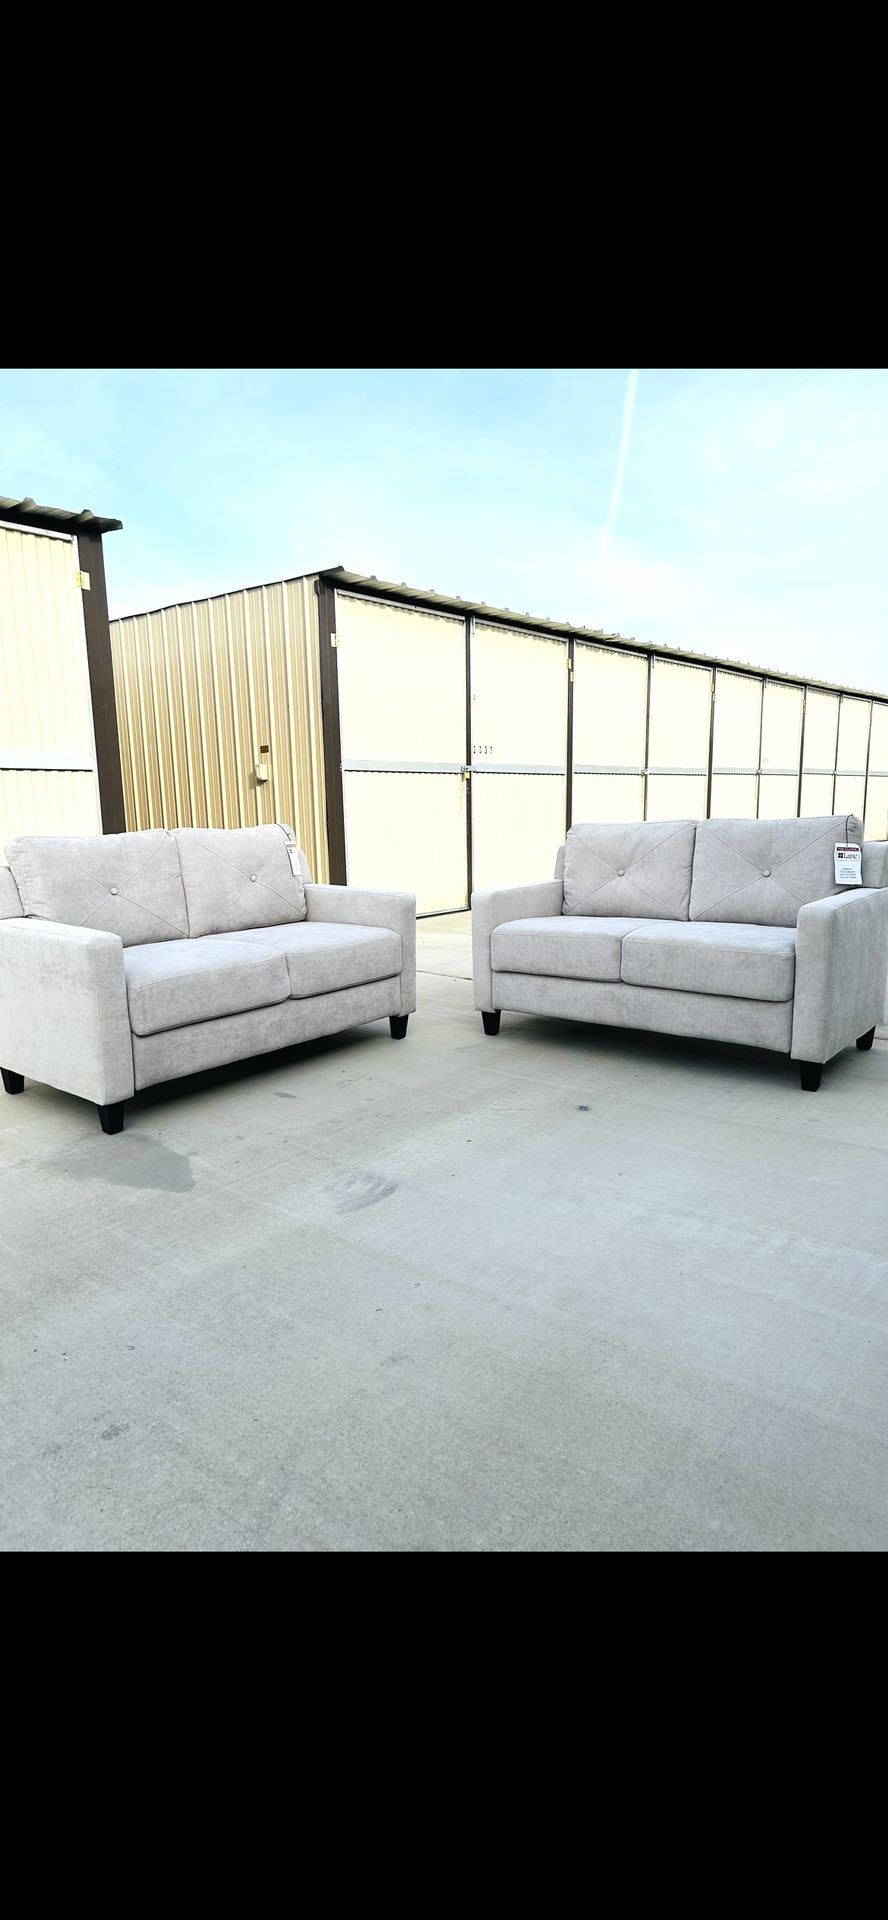 2 Band New Taupe/Light Beige Loveseats 